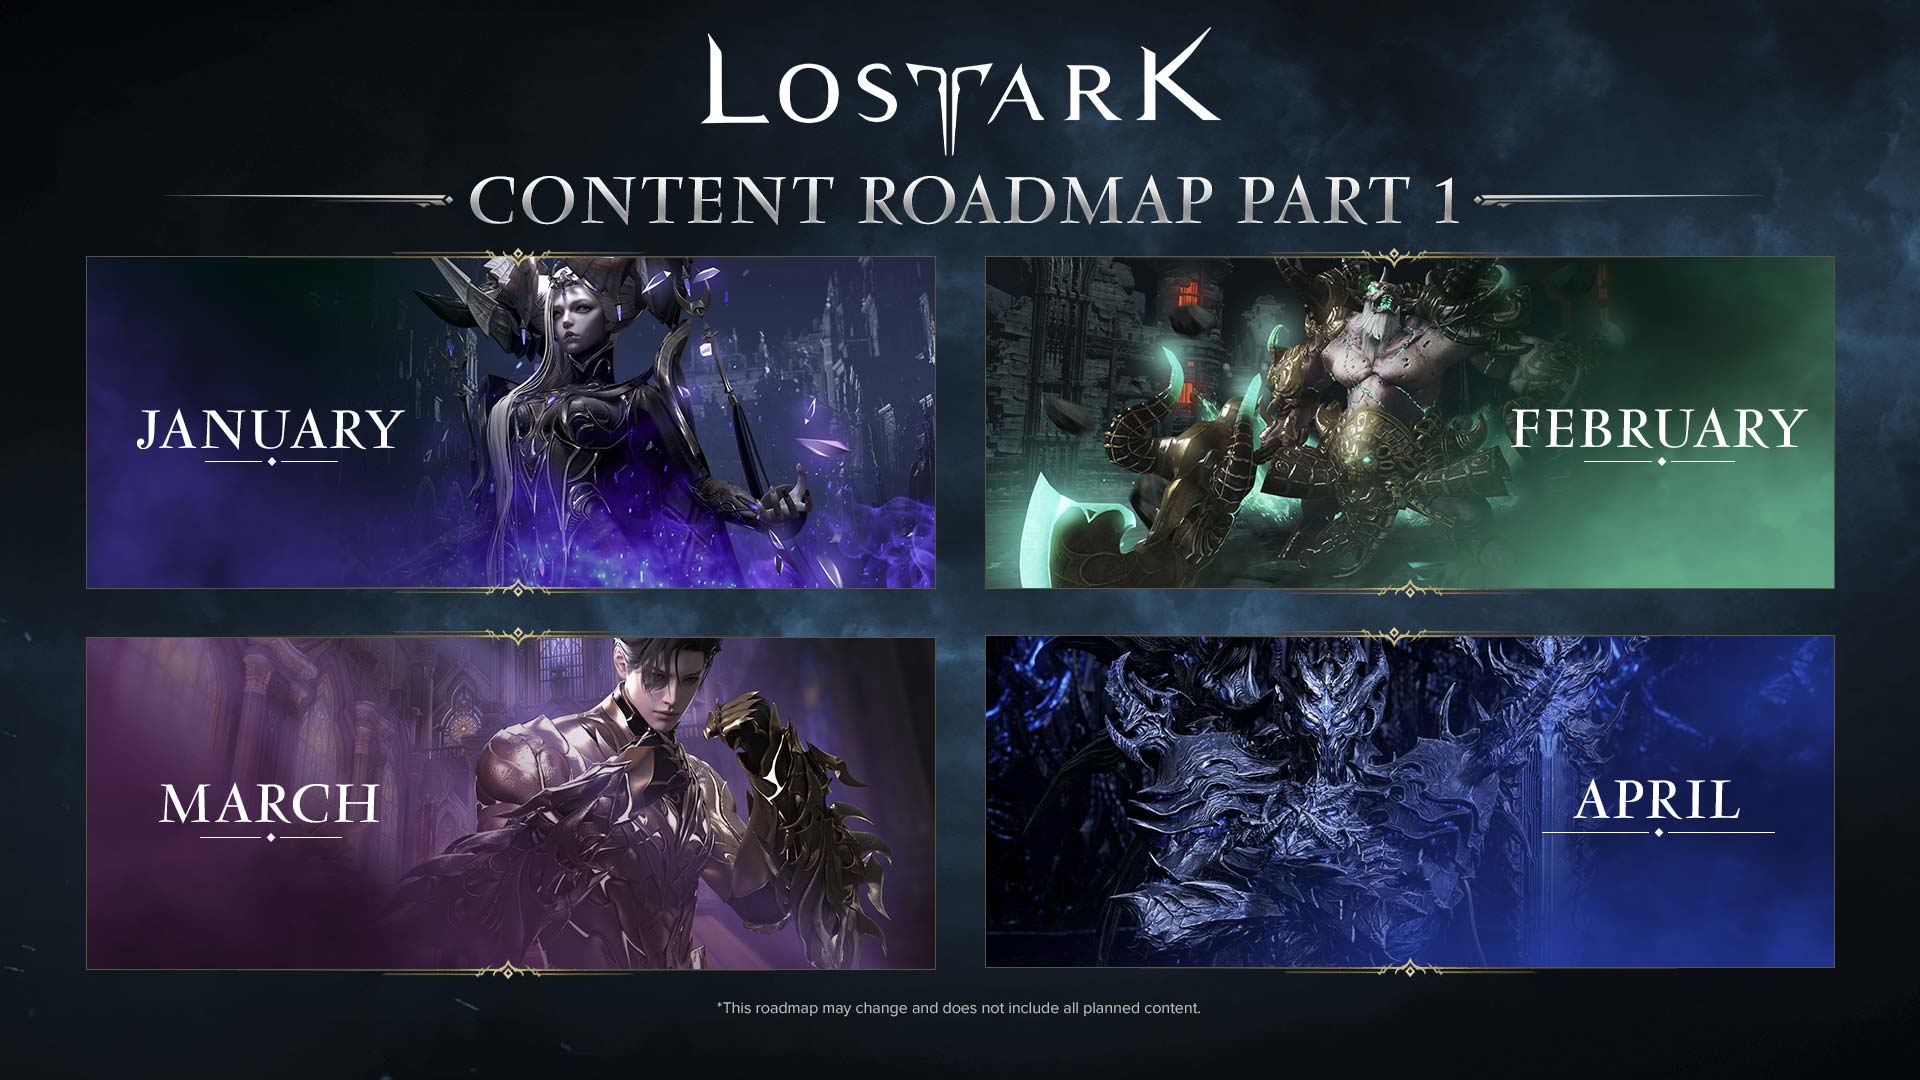 Games and Smilegate RPG's 'Lost Ark' launches - News